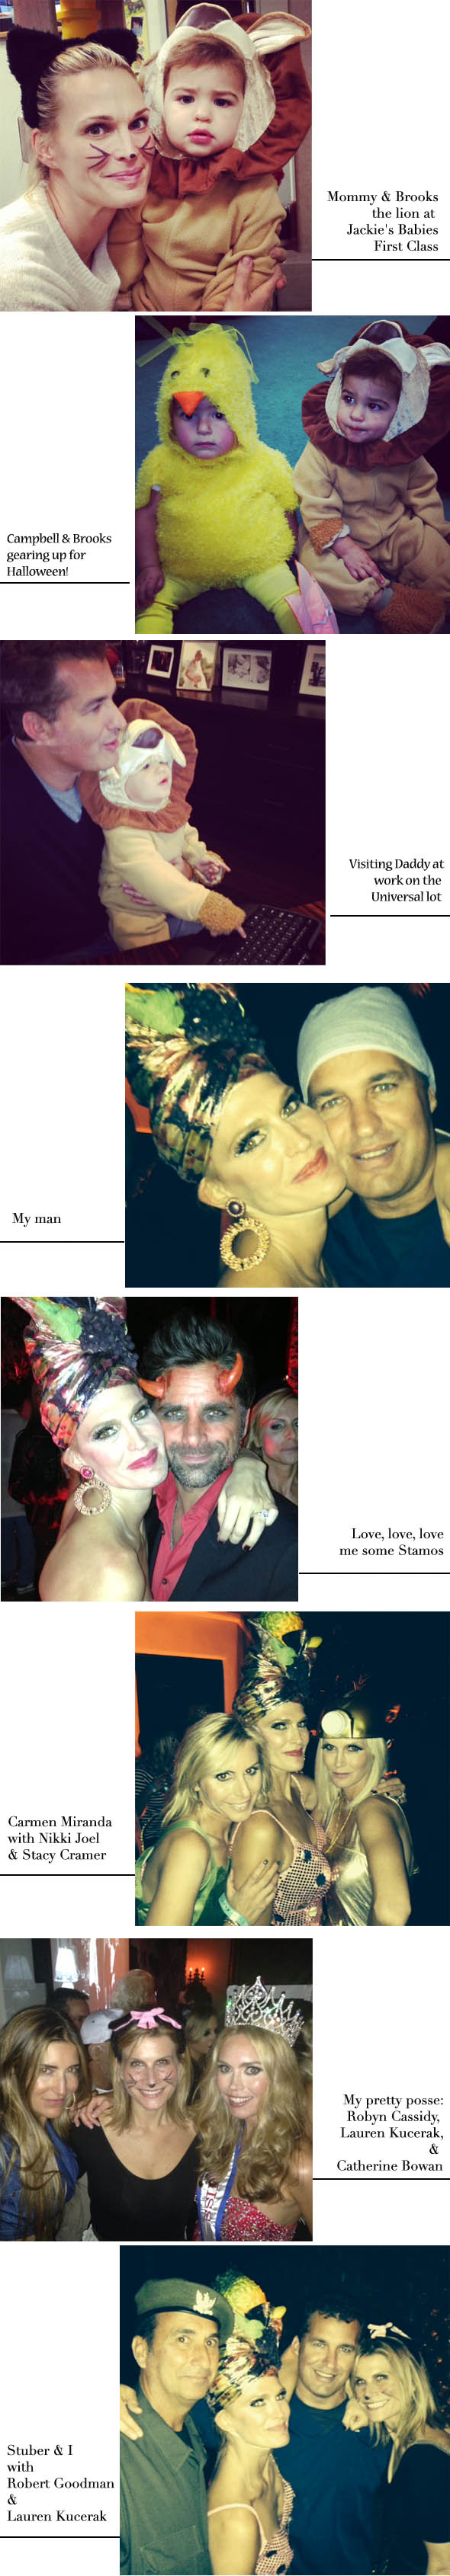 molly sims halloween collage 2013